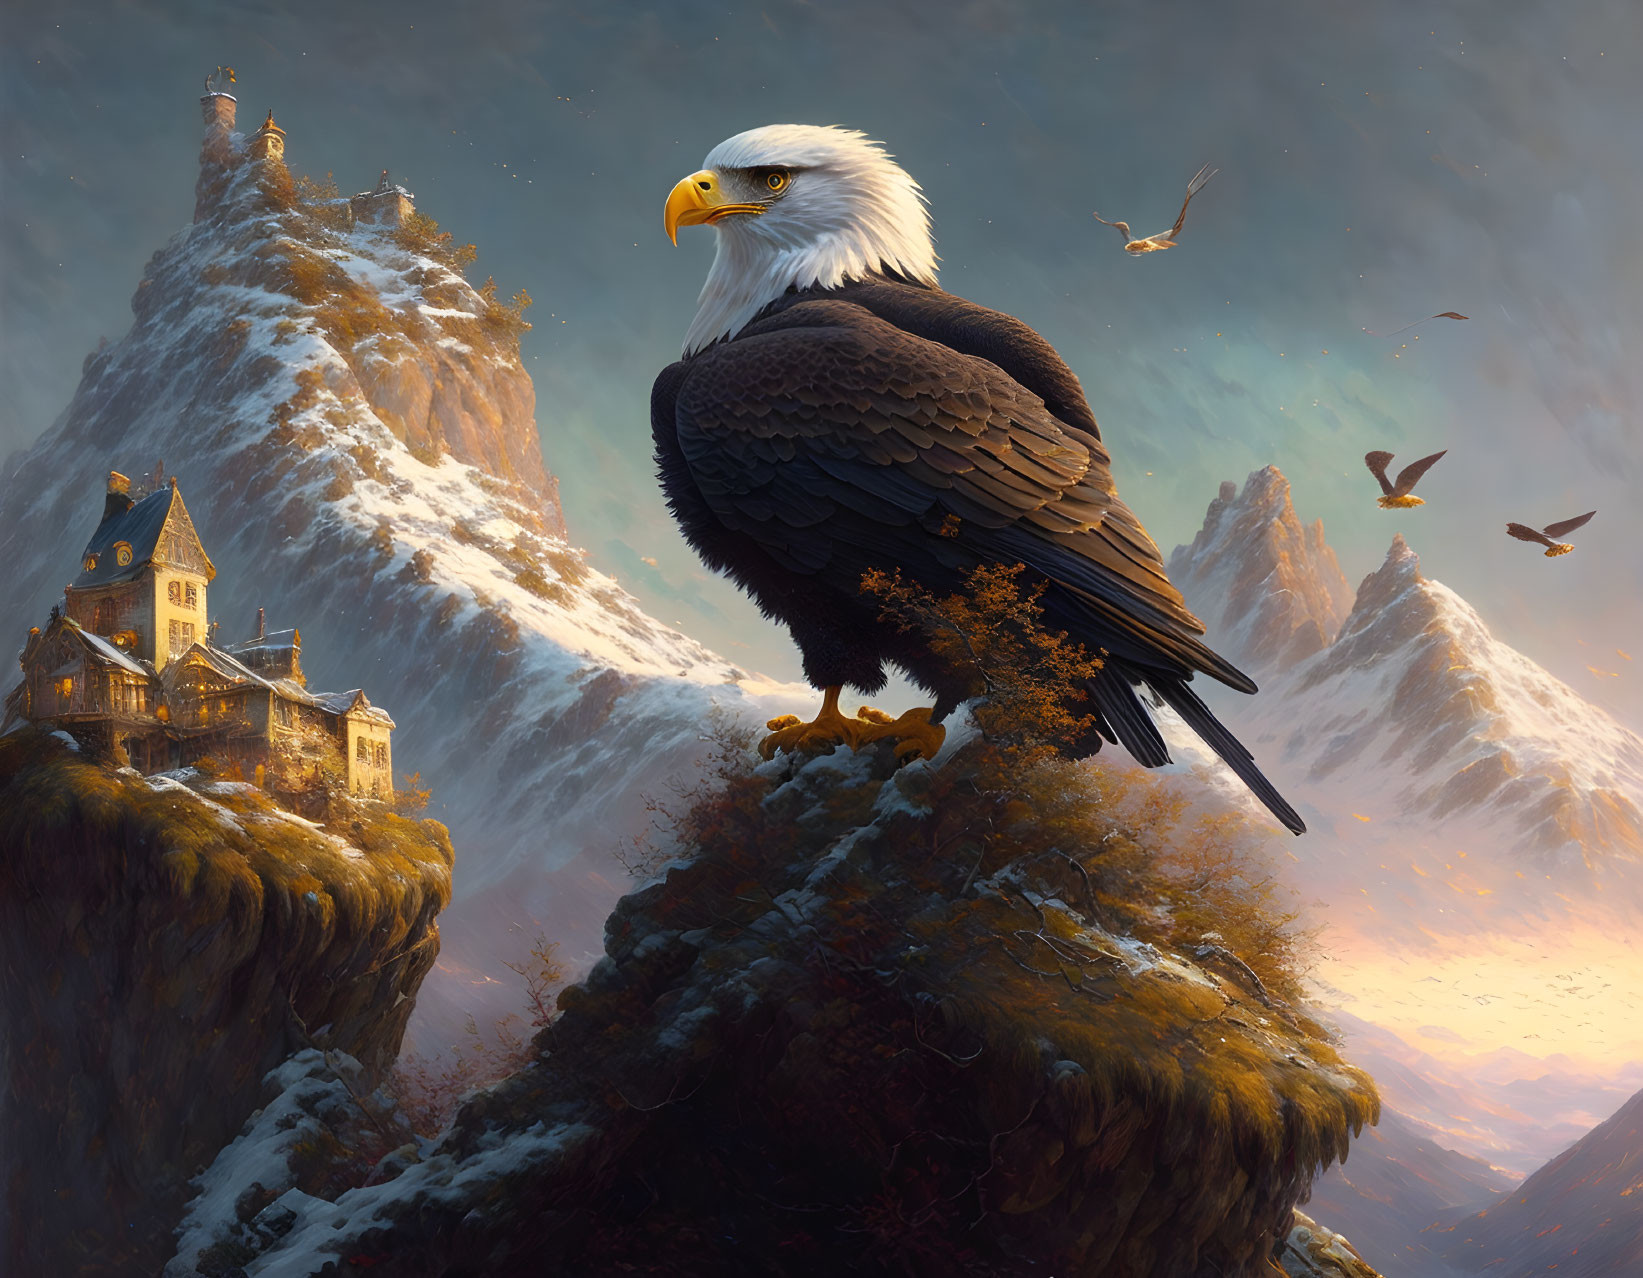 "The Eagle's Nest by John D. Shaw